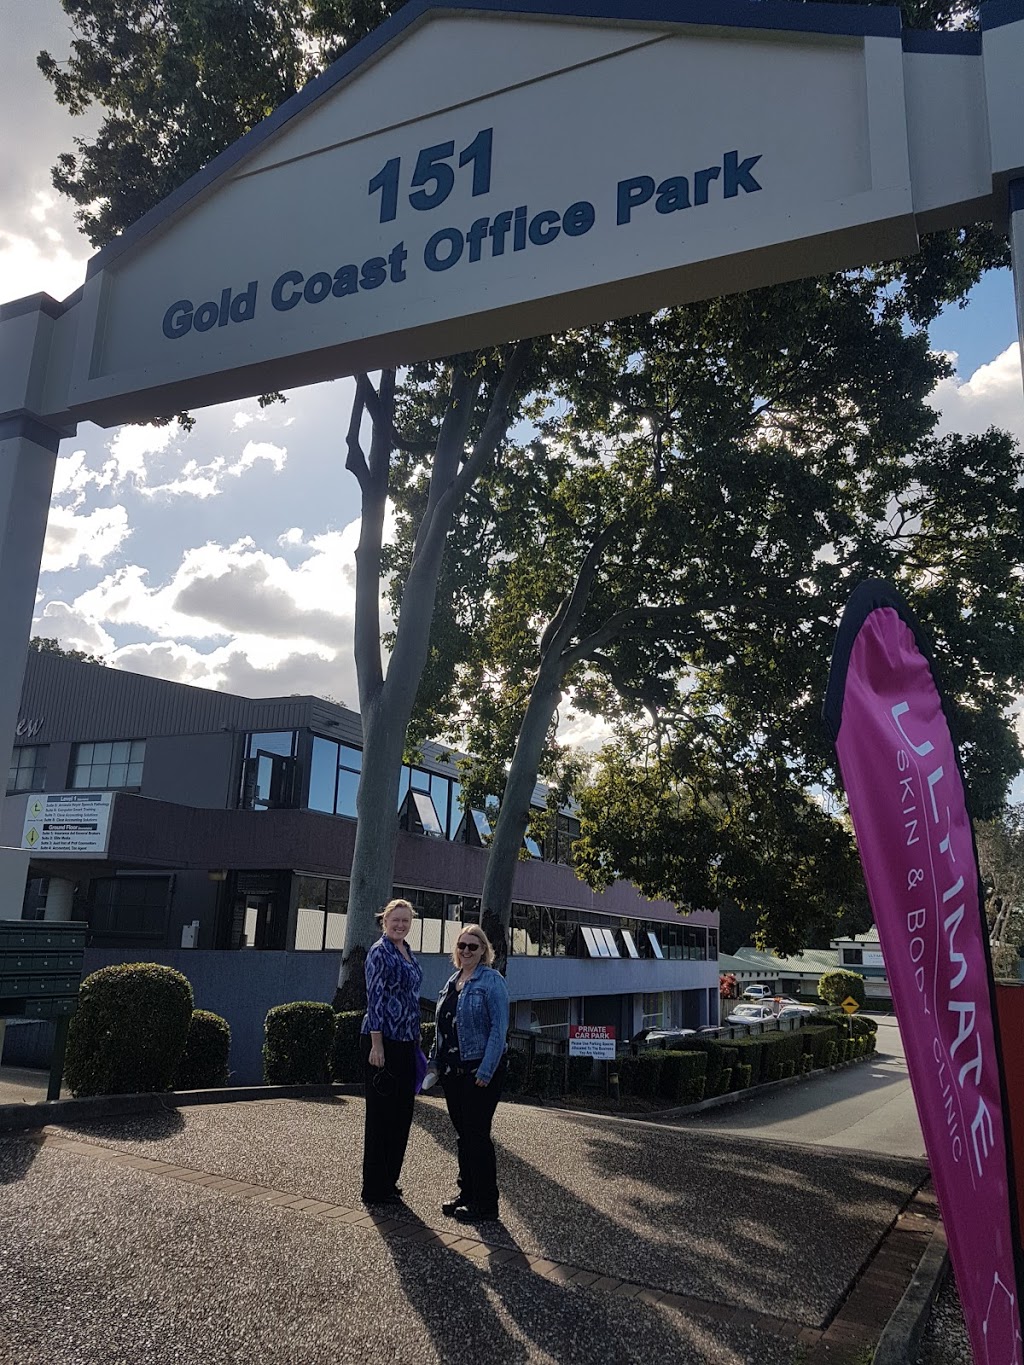 On The Park General Practice Dr D Rowlands Dr M Pearcy Dr K Myer | 13-15/151 Cotlew St, Ashmore QLD 4214, Australia | Phone: (07) 5527 9445